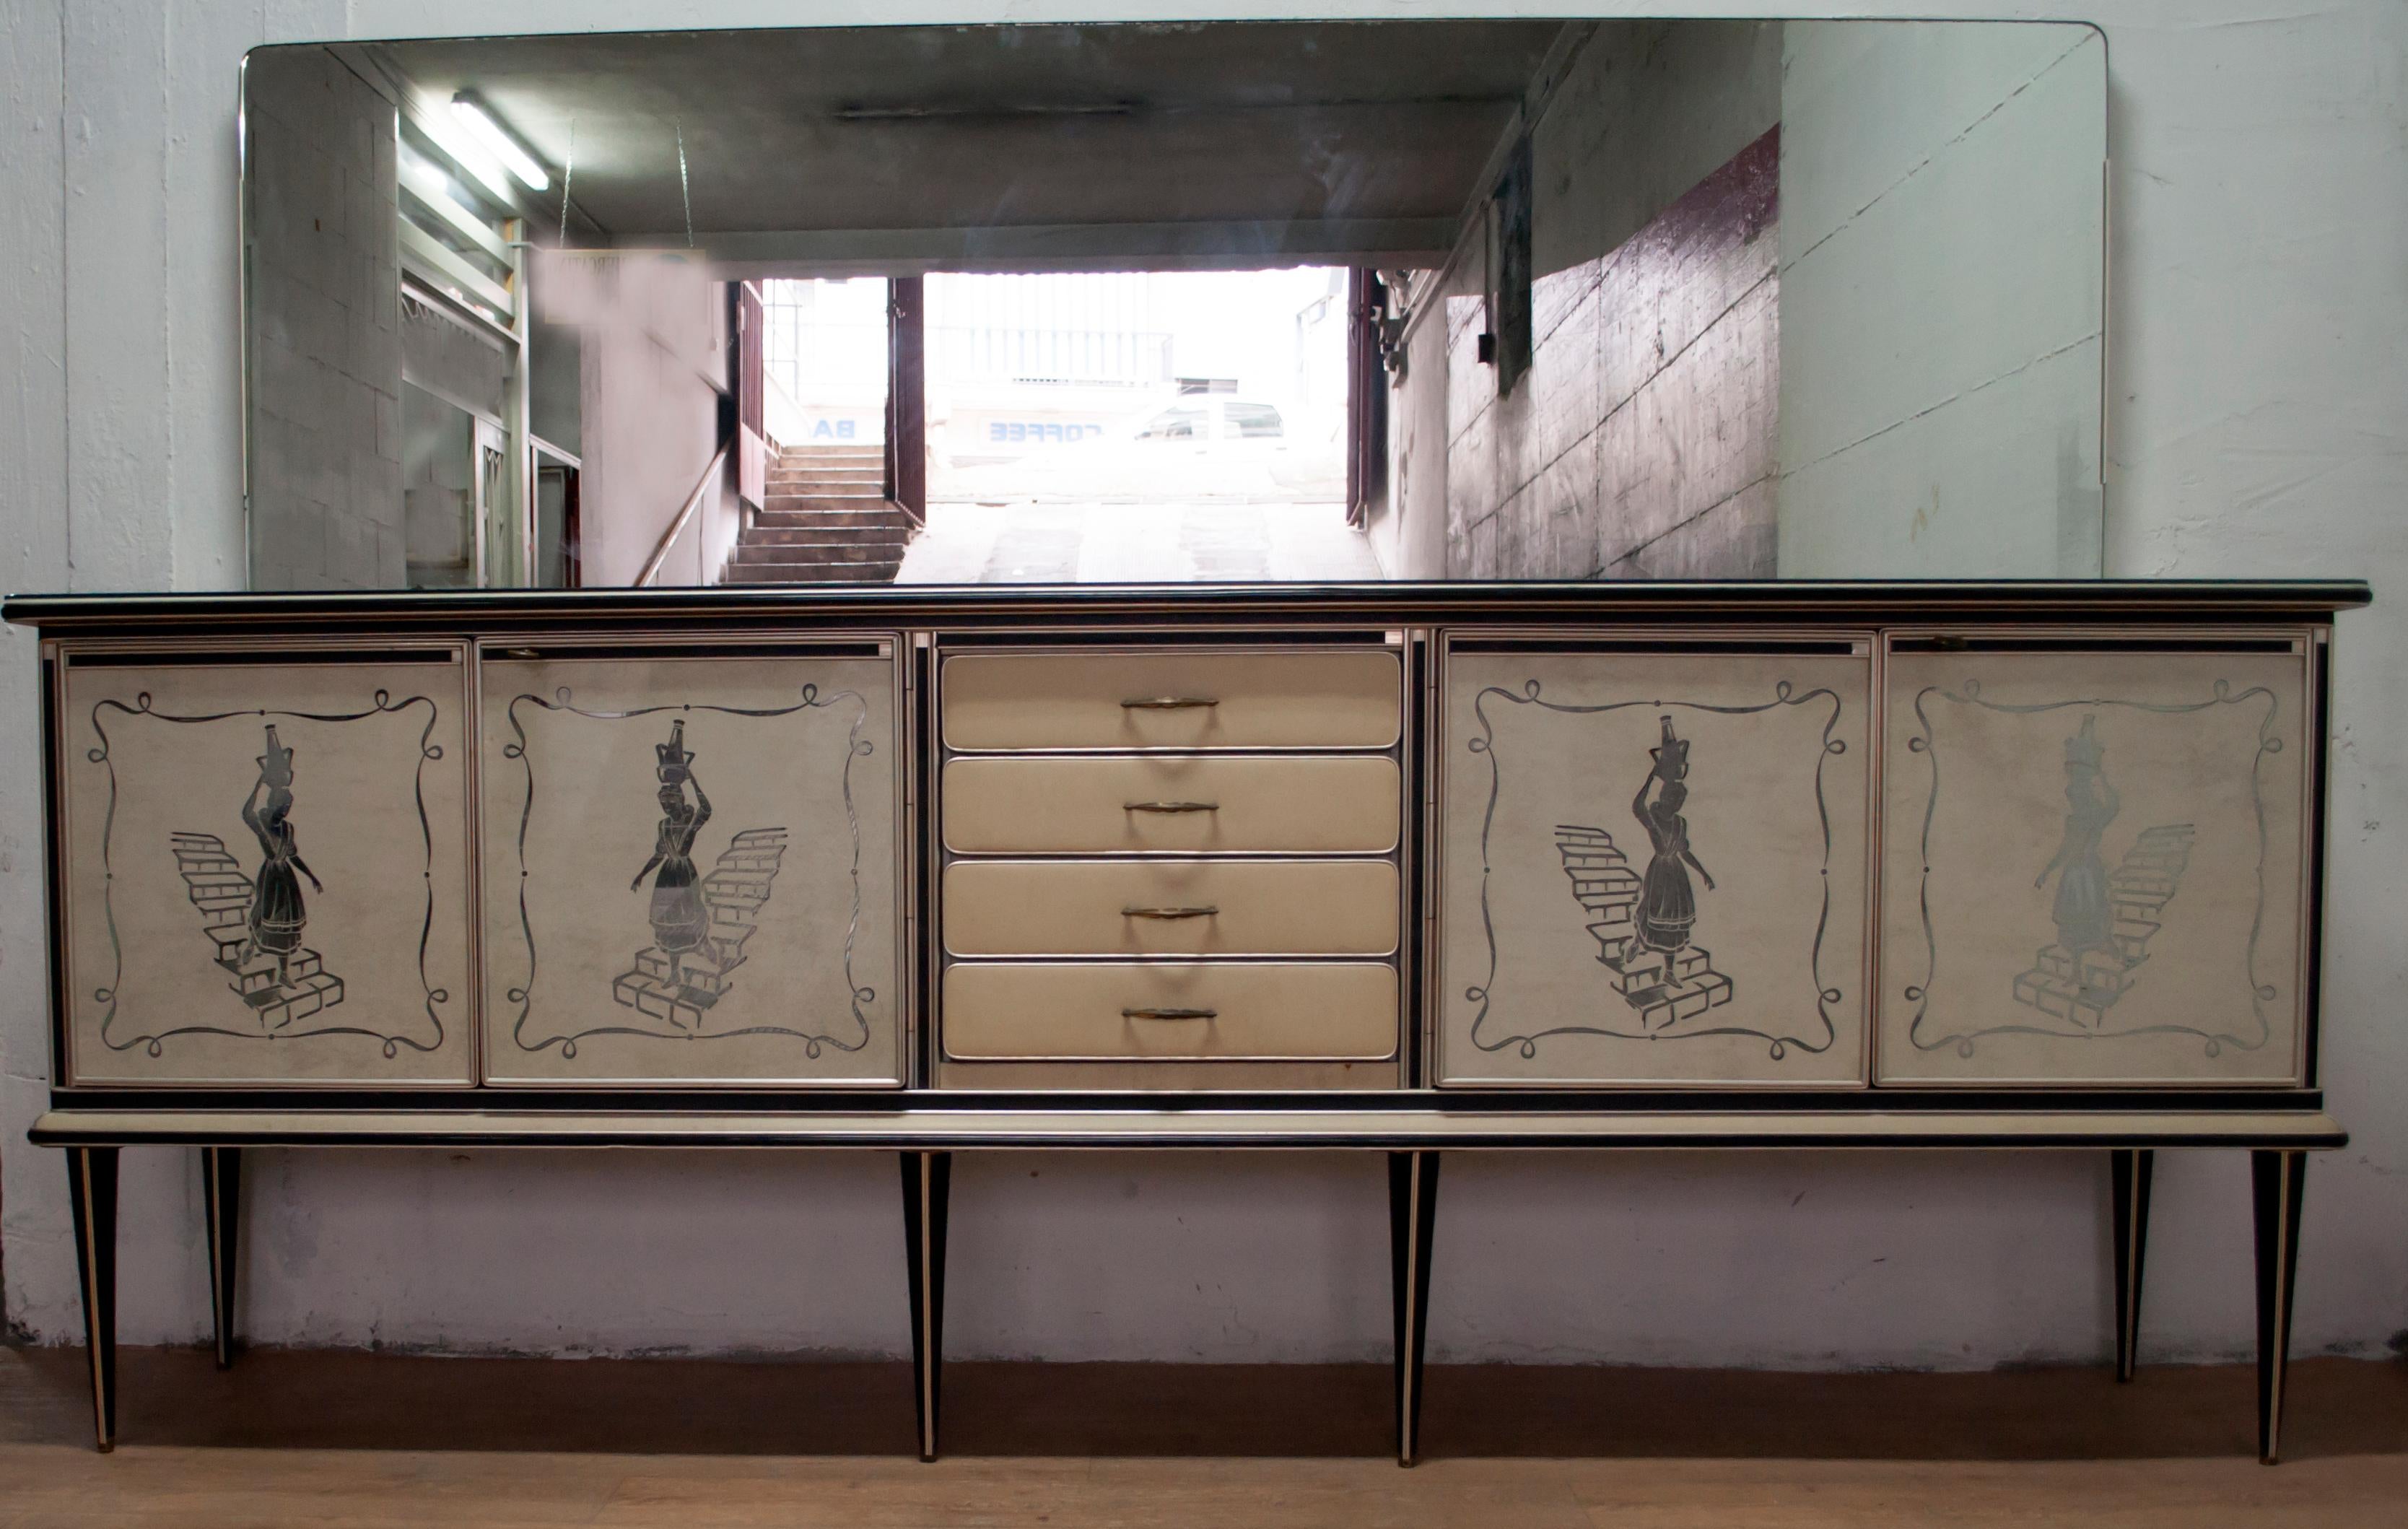 Rare and highly collectable sideboard designed in Italy by Umberto Mascagni of Bologna. Cabinet sideboard with four doors and four drawers from the 1950s was realized with back-stained glass doors, four doors with a woman walking down the stairs.